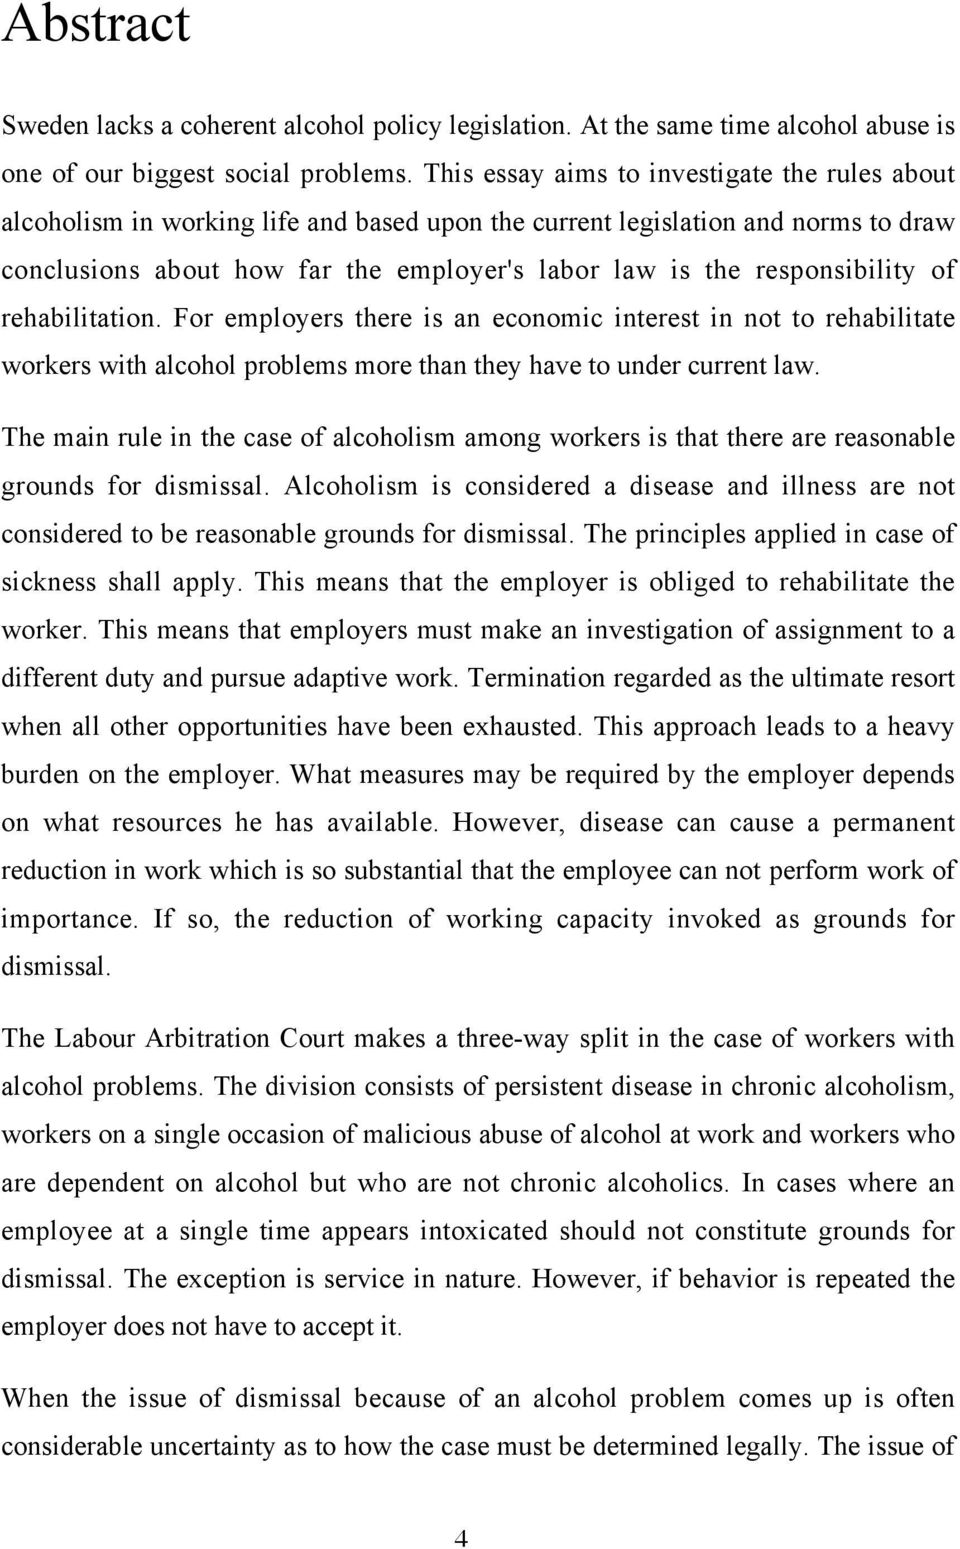 responsibility of rehabilitation. For employers there is an economic interest in not to rehabilitate workers with alcohol problems more than they have to under current law.